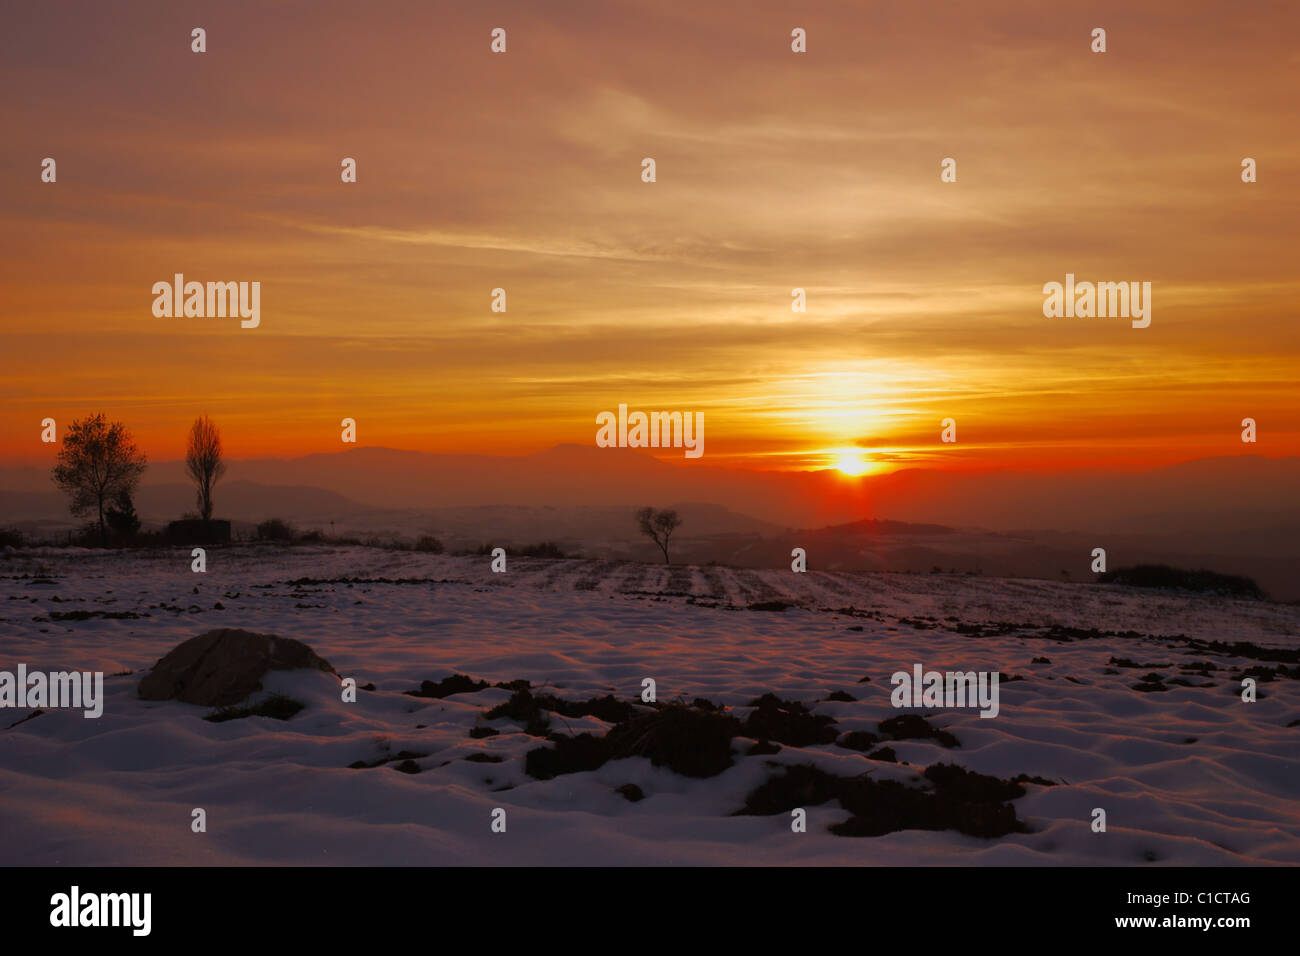 Beautiful winter sunset with snow over cultivated land Stock Photo